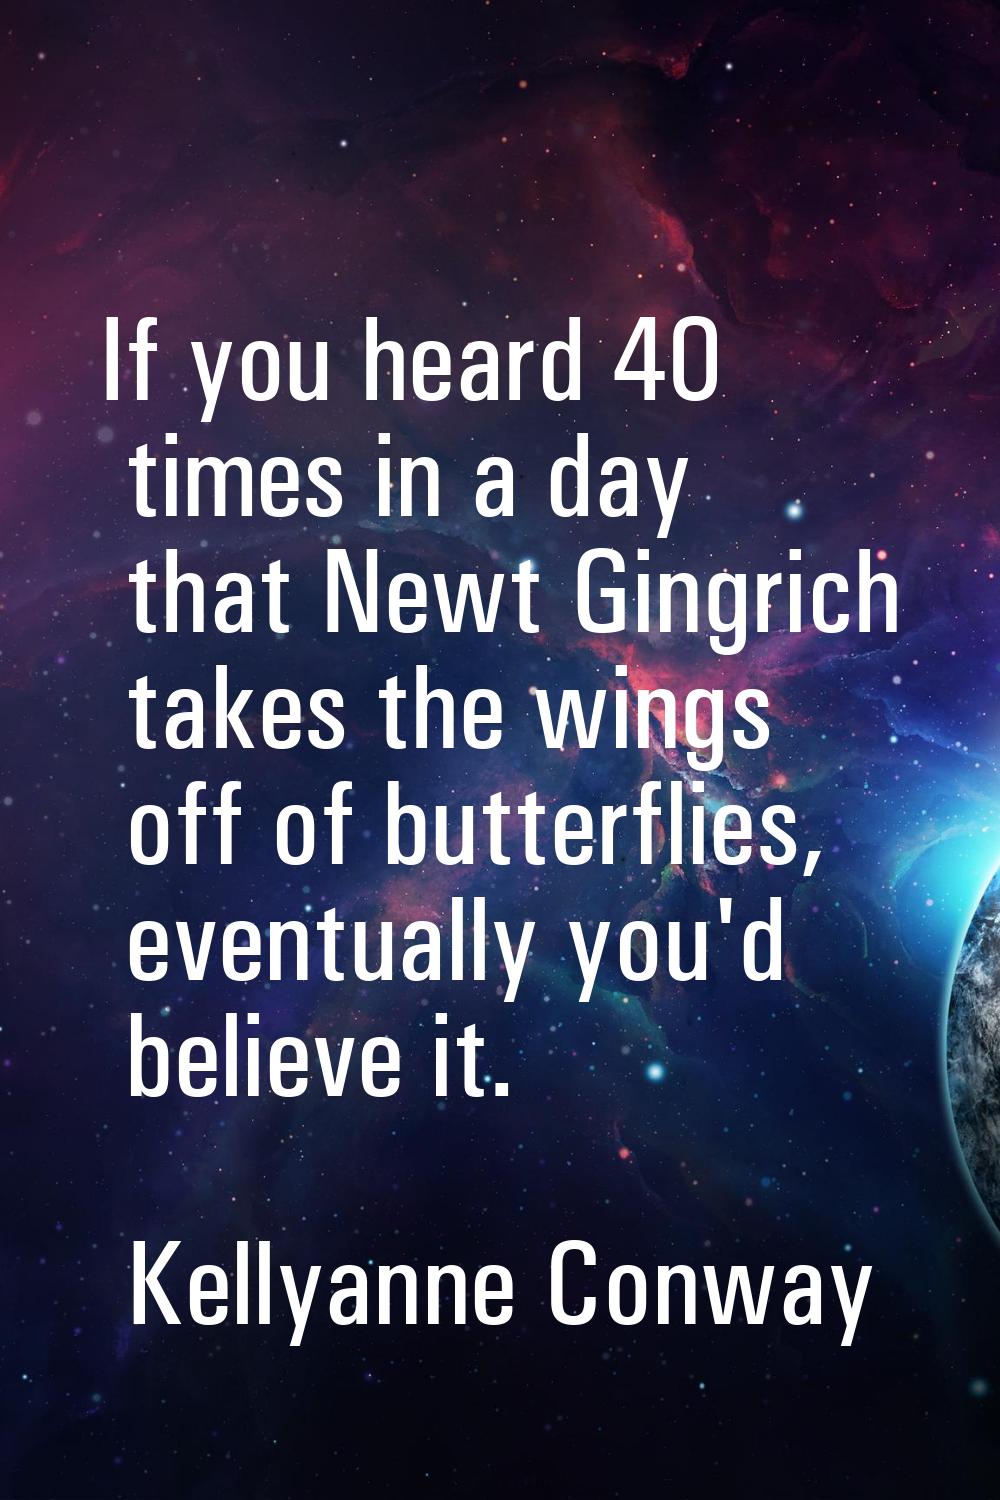 If you heard 40 times in a day that Newt Gingrich takes the wings off of butterflies, eventually yo